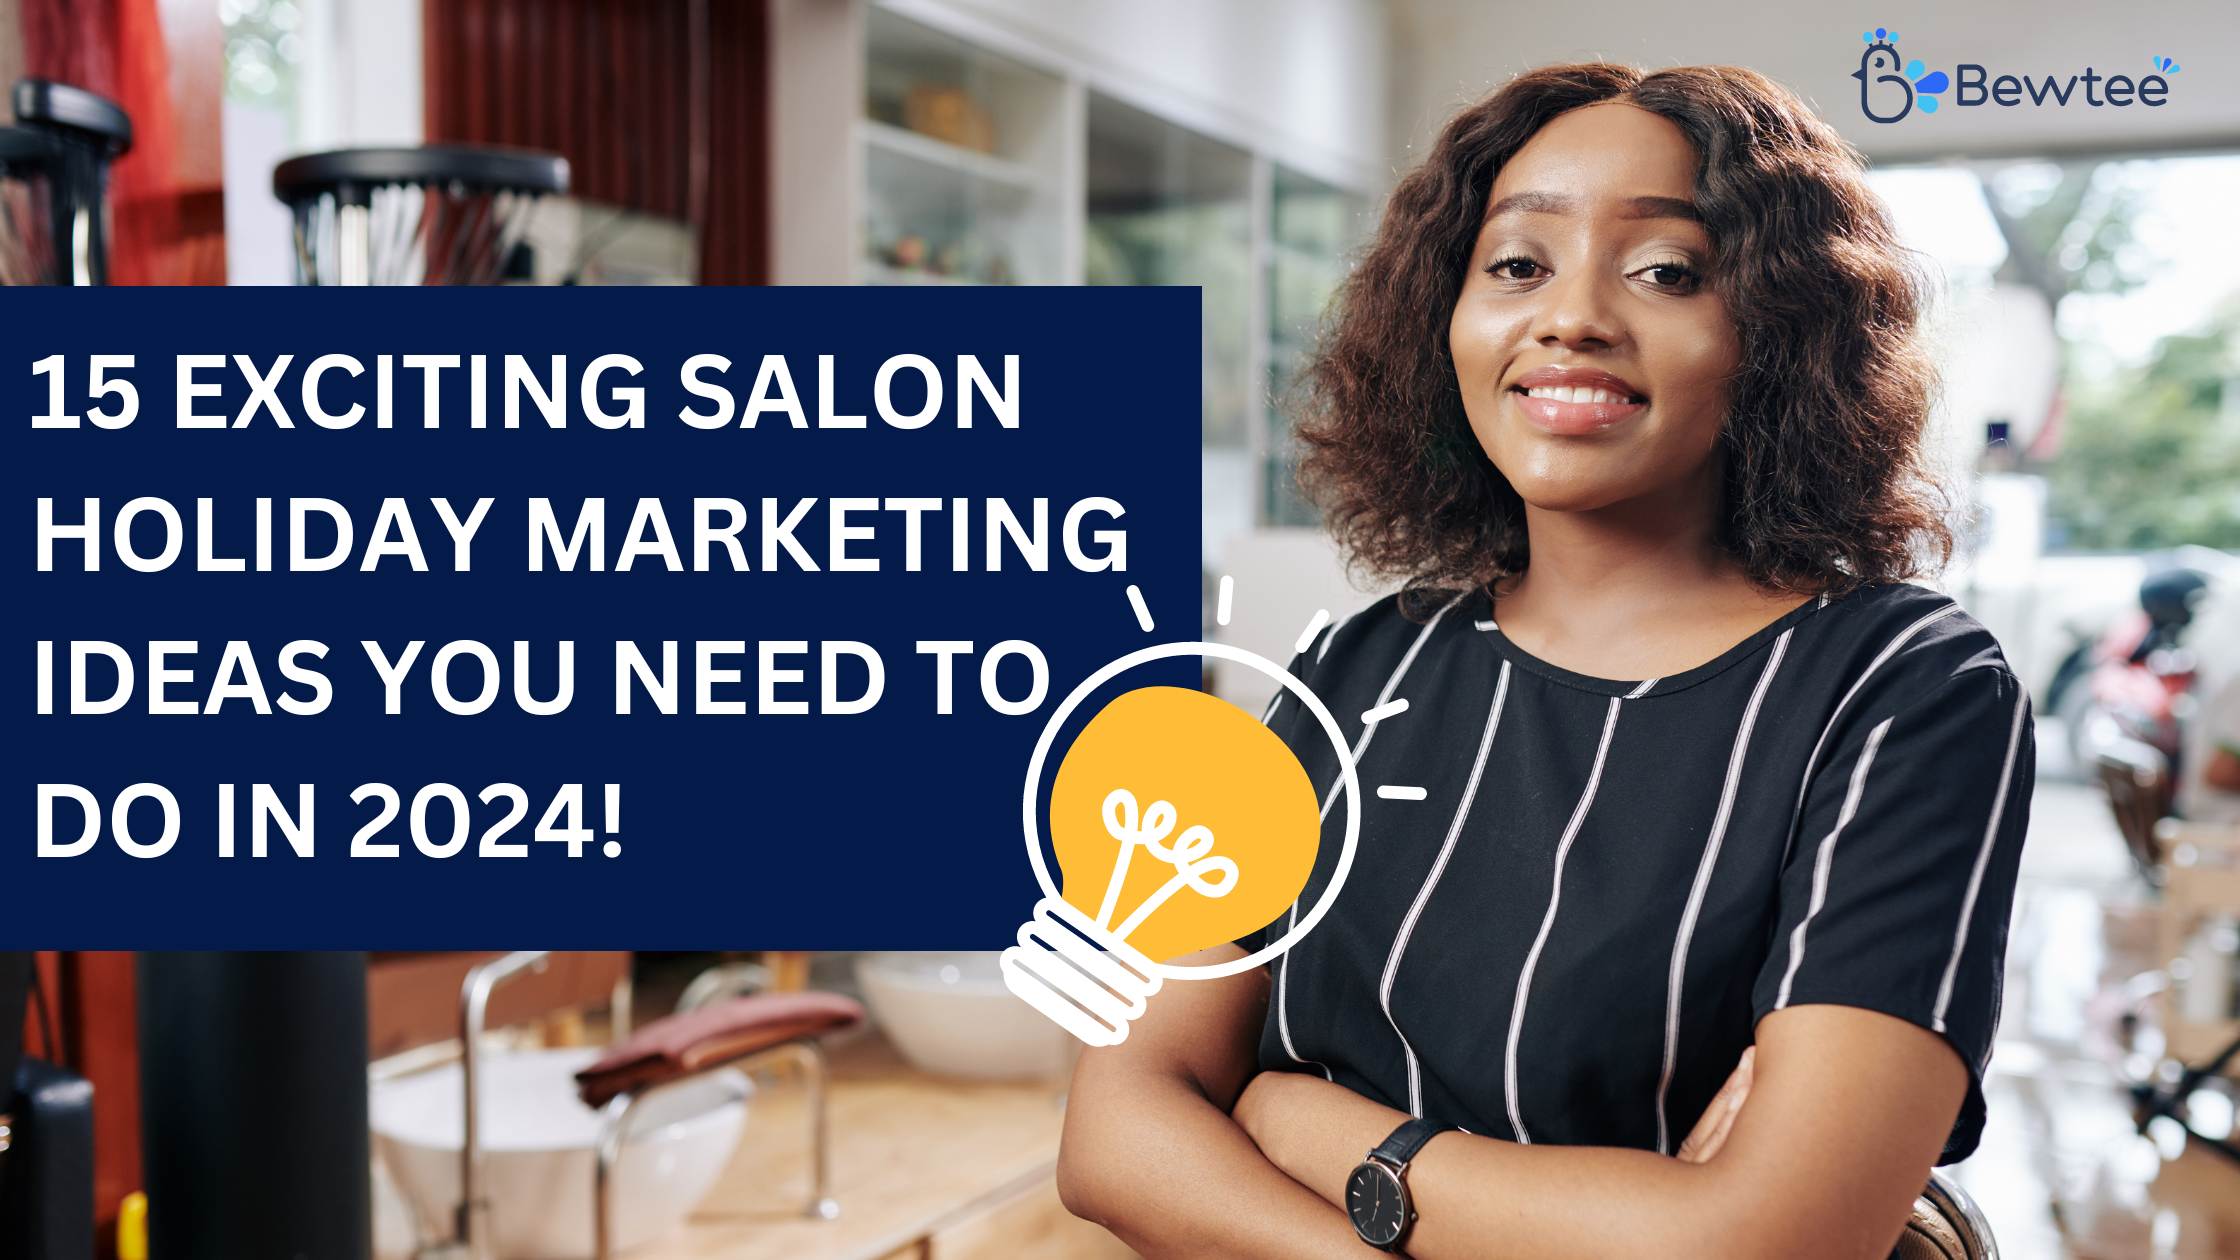 15 Exciting Salon Holiday Marketing Ideas You need to do in 2024!